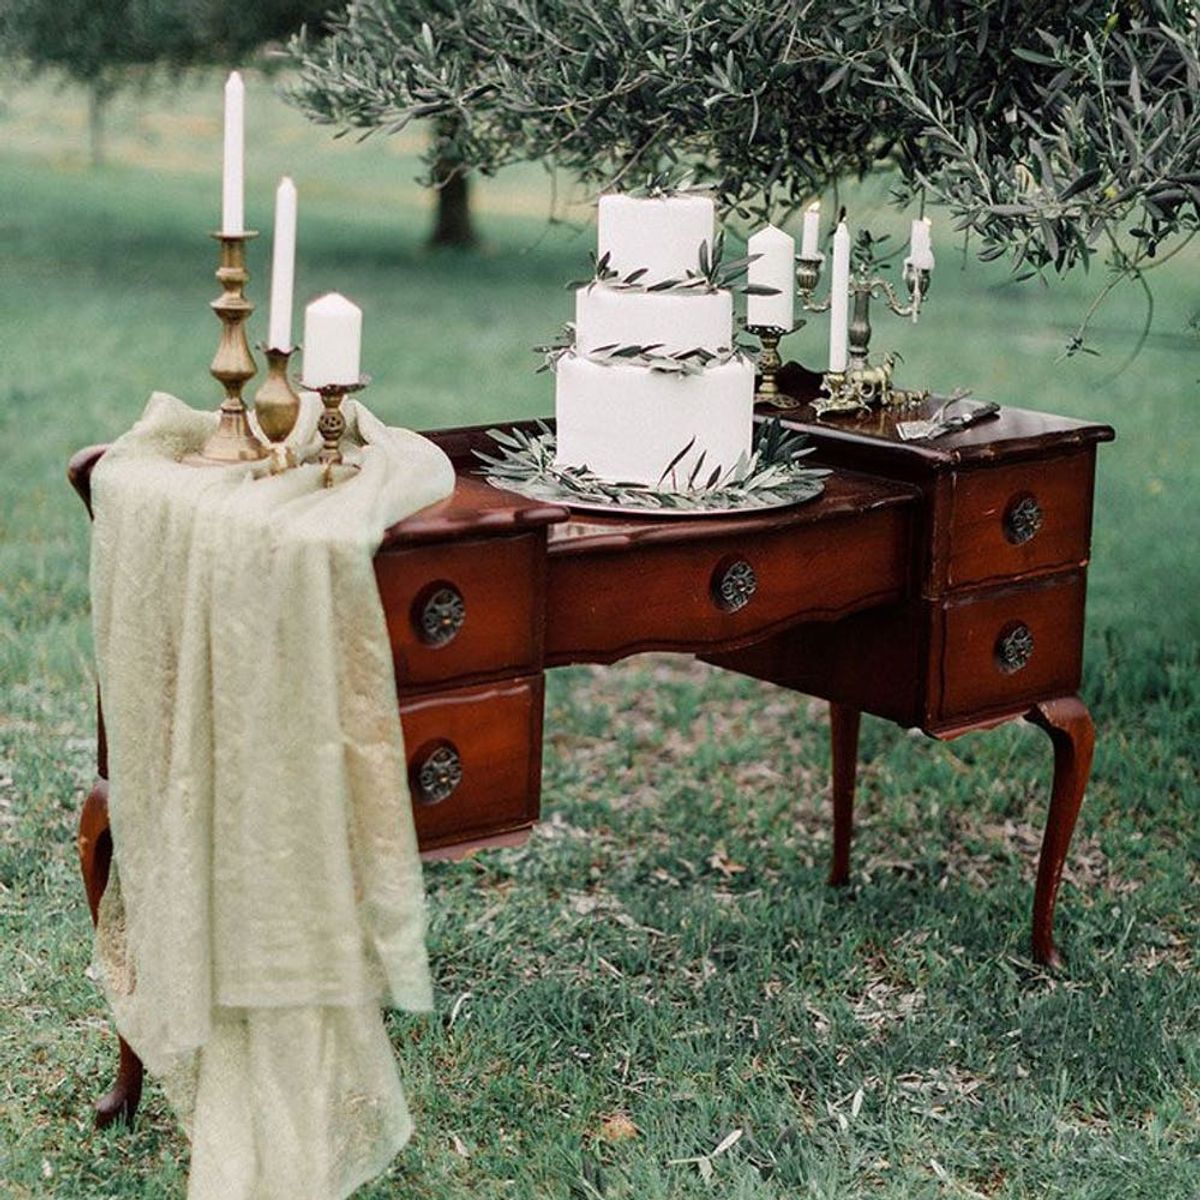 13 Unique Ways to Use Furniture for Your Wedding Decor